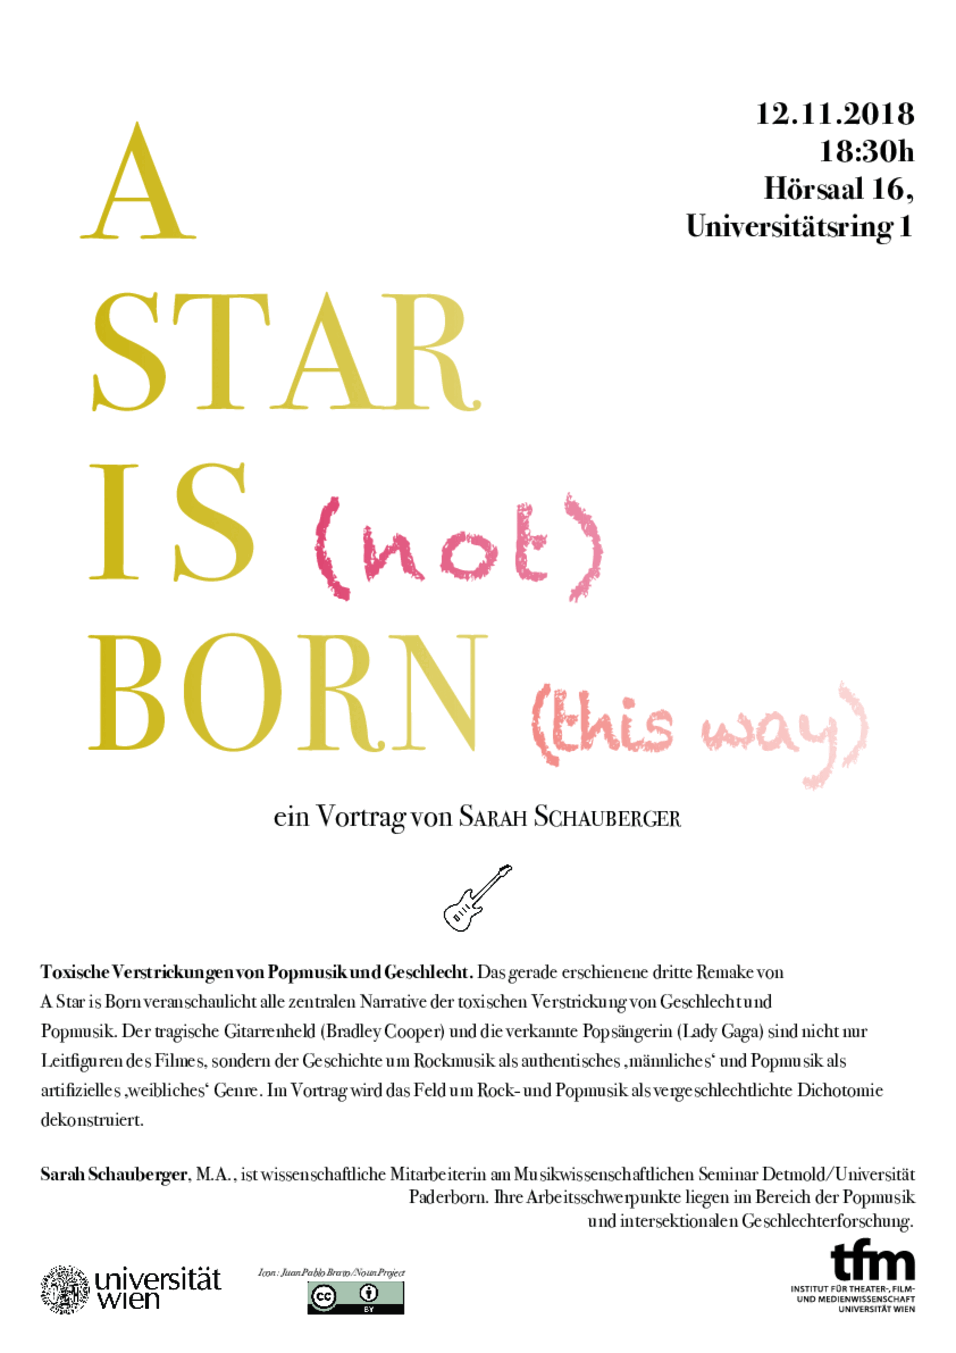 A Star Is (not) Born (this way)